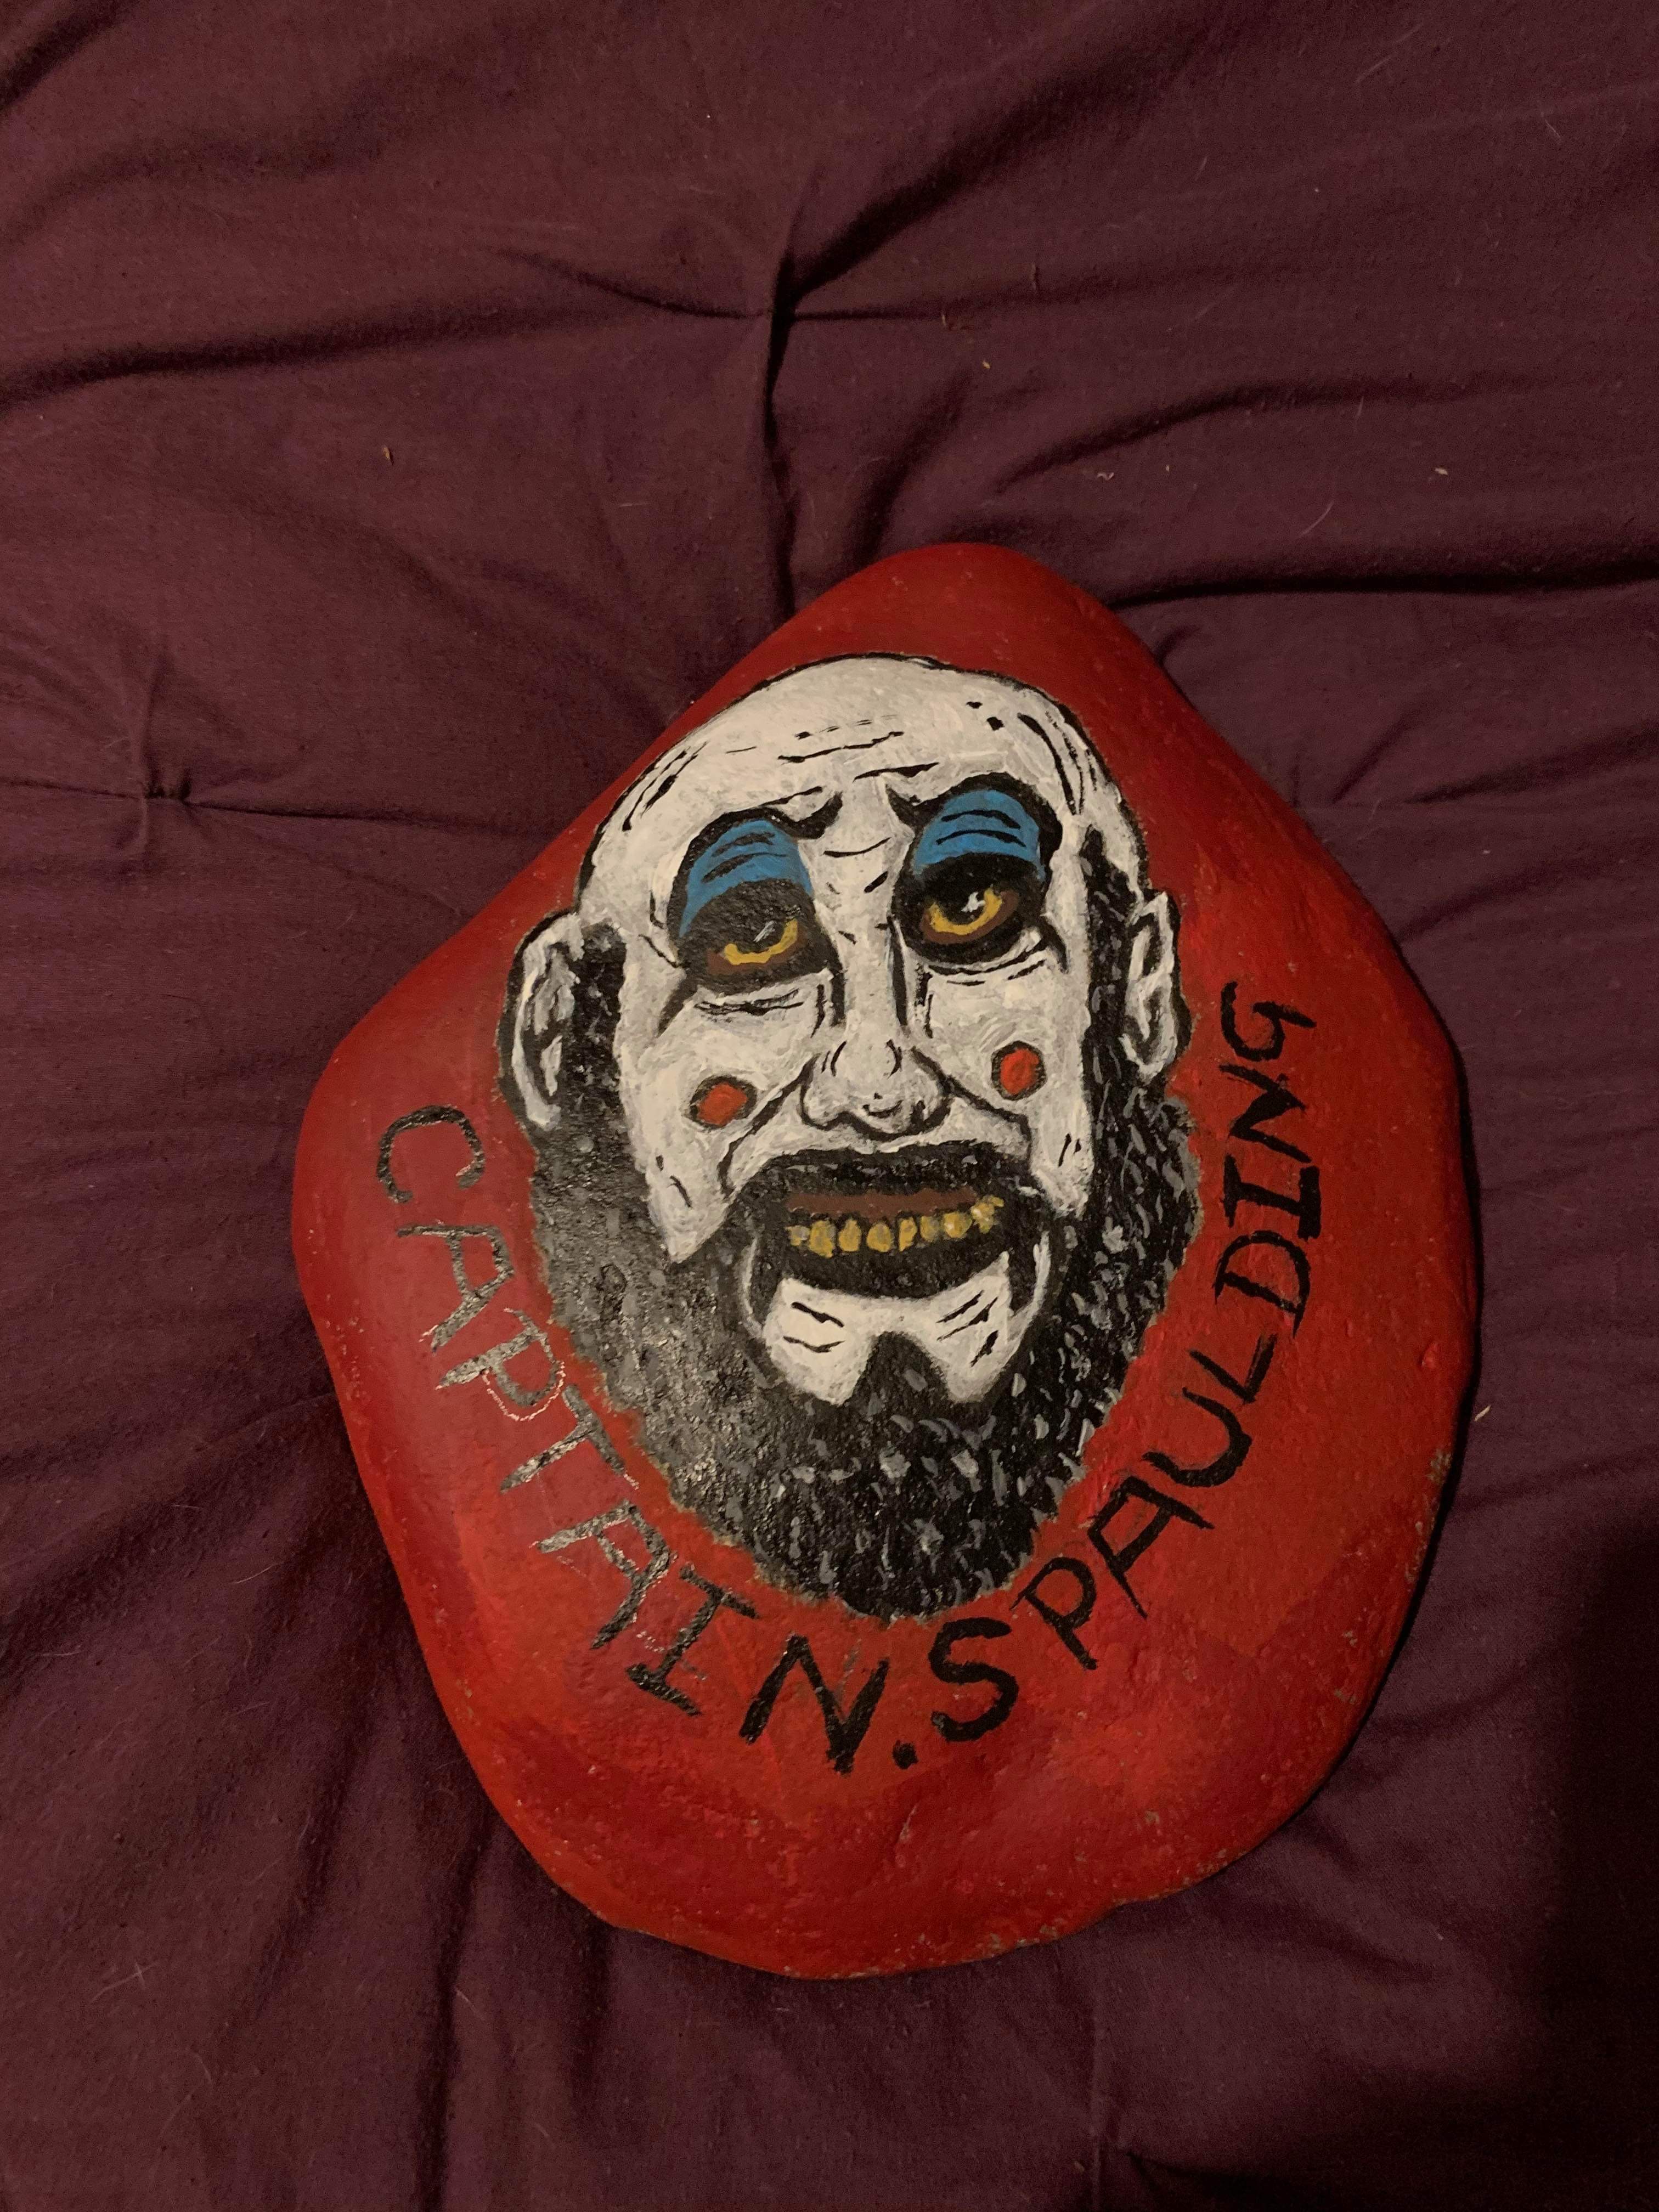 This is a painting that my partner made of her favourite horror actor the late great sid haig as captain spaulding my partner suffers from complex ptsd, severe anxiety and bpd and she loves drawing and painting and she doesnt think her paintings are that good